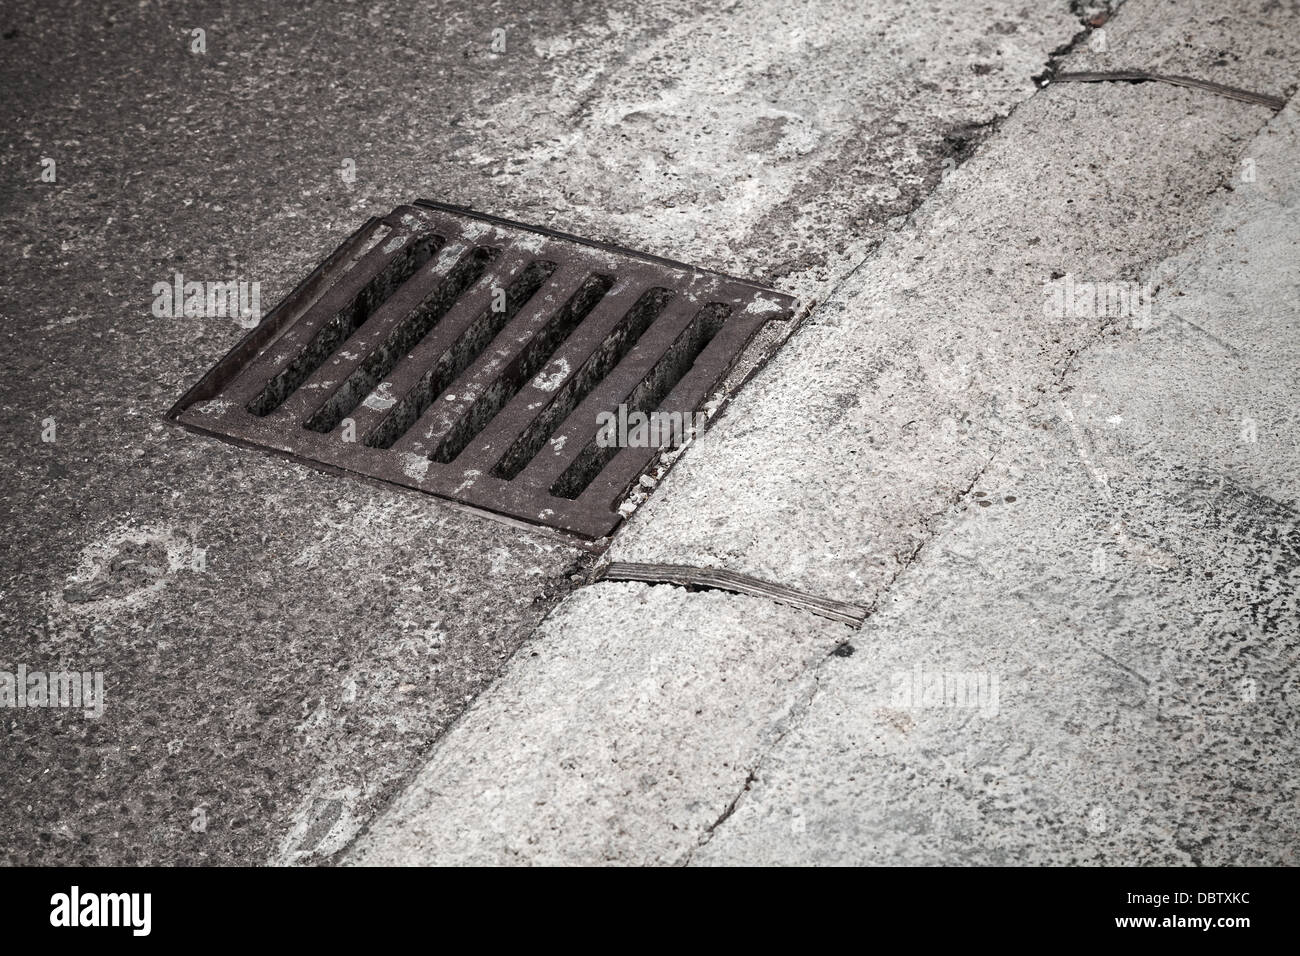 Drainage cover on the road side Stock Photo